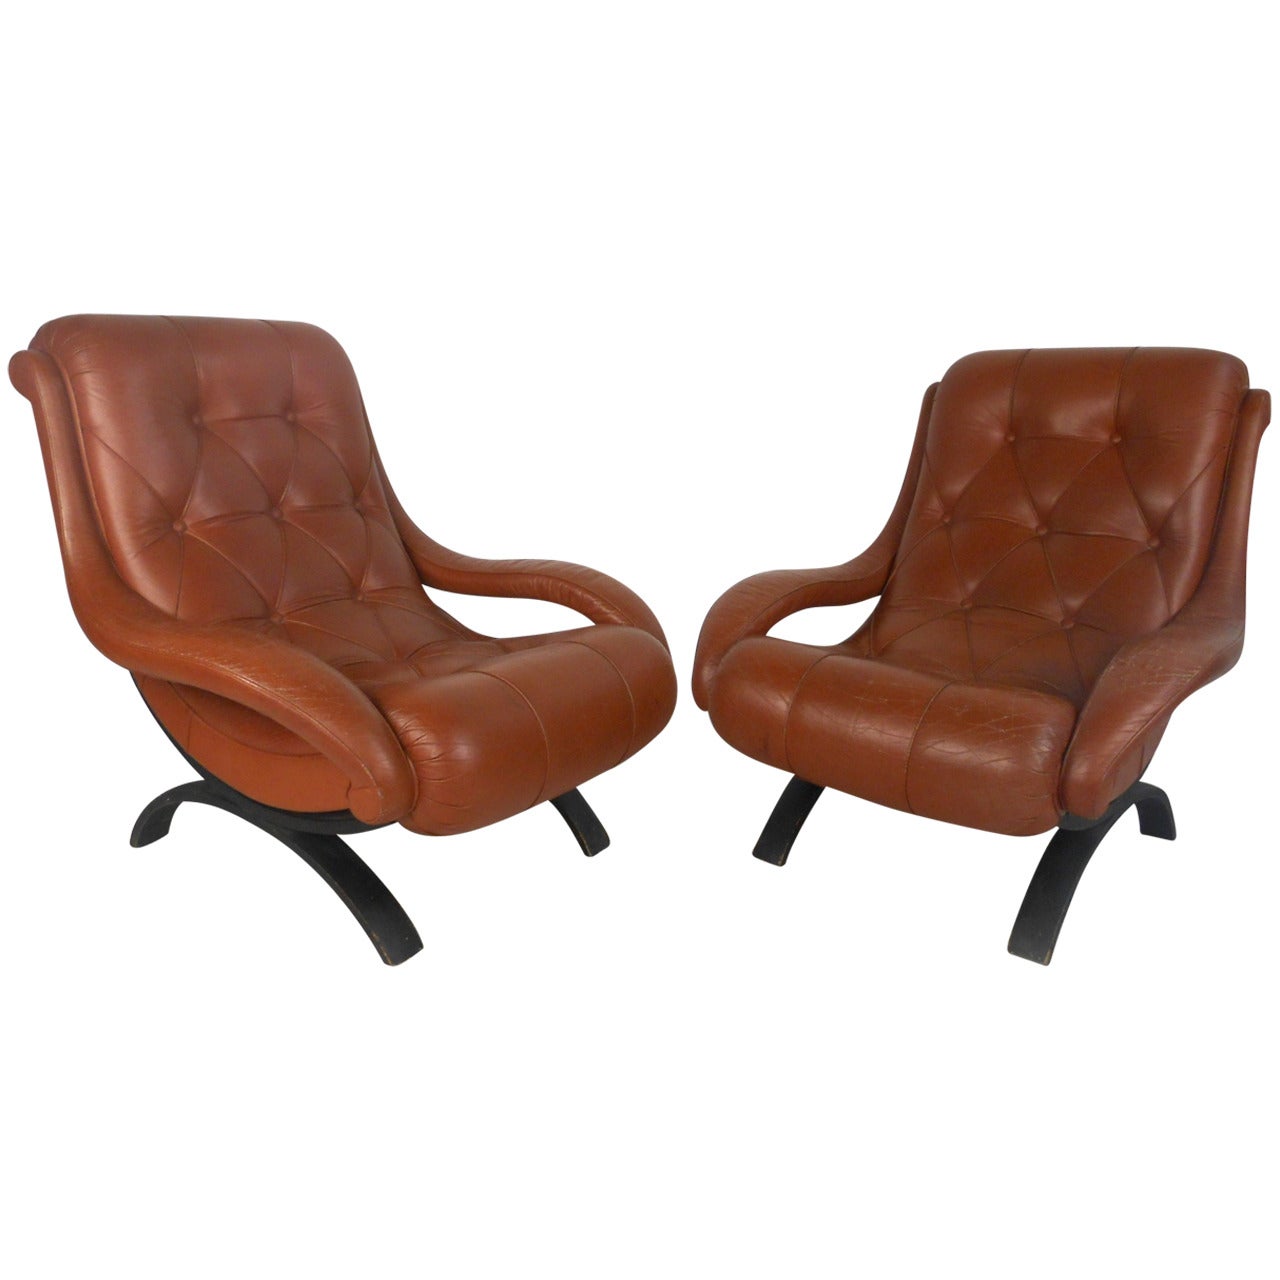 Pair of Midcentury Tufted Leather Lounge Chairs